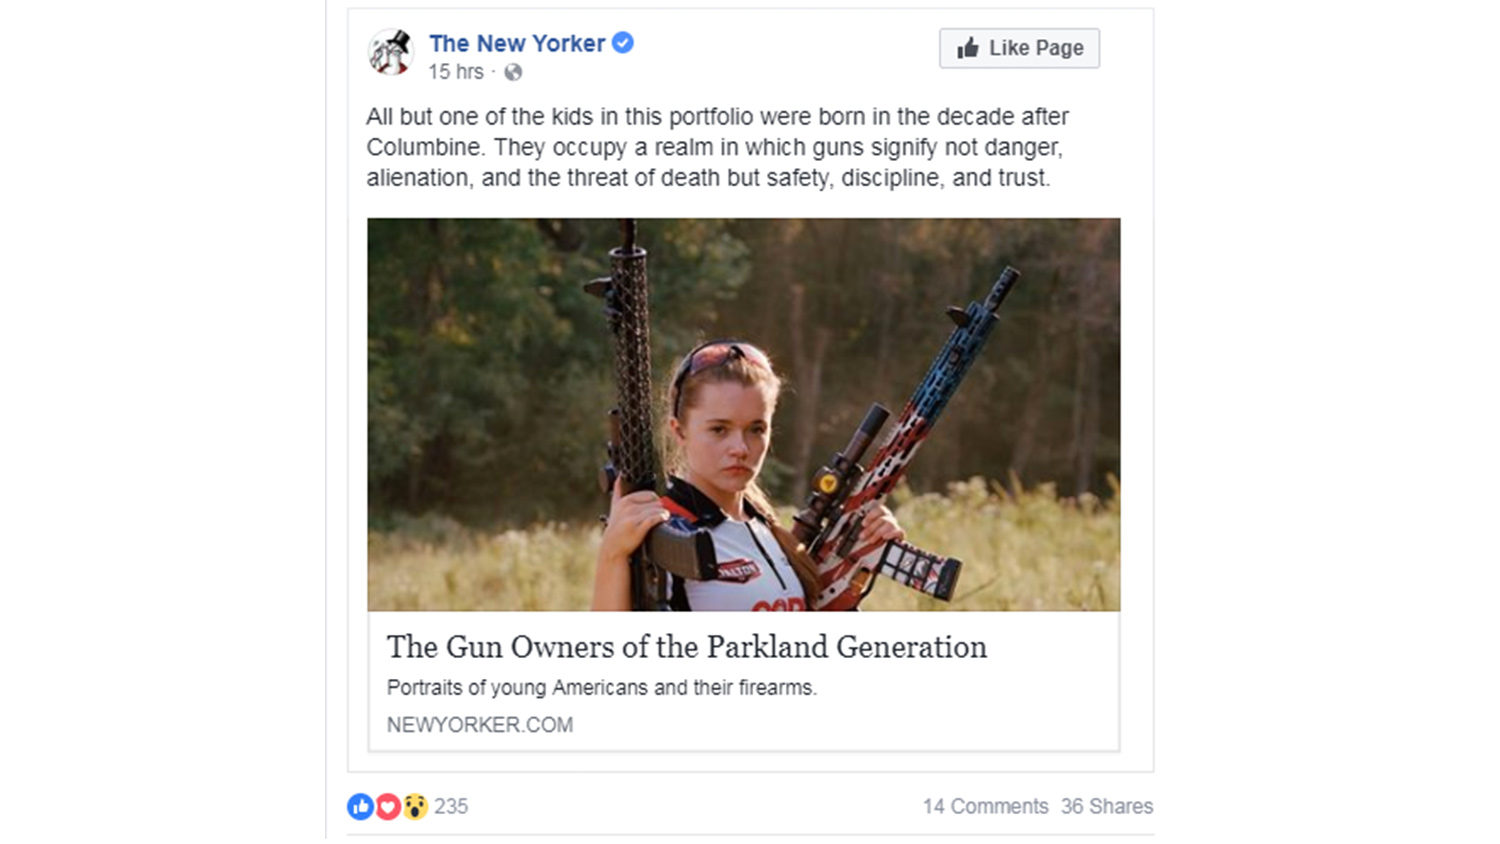 Cheyenne Dalton: The New Yorker "Gun Owners of the Parkland Generation"